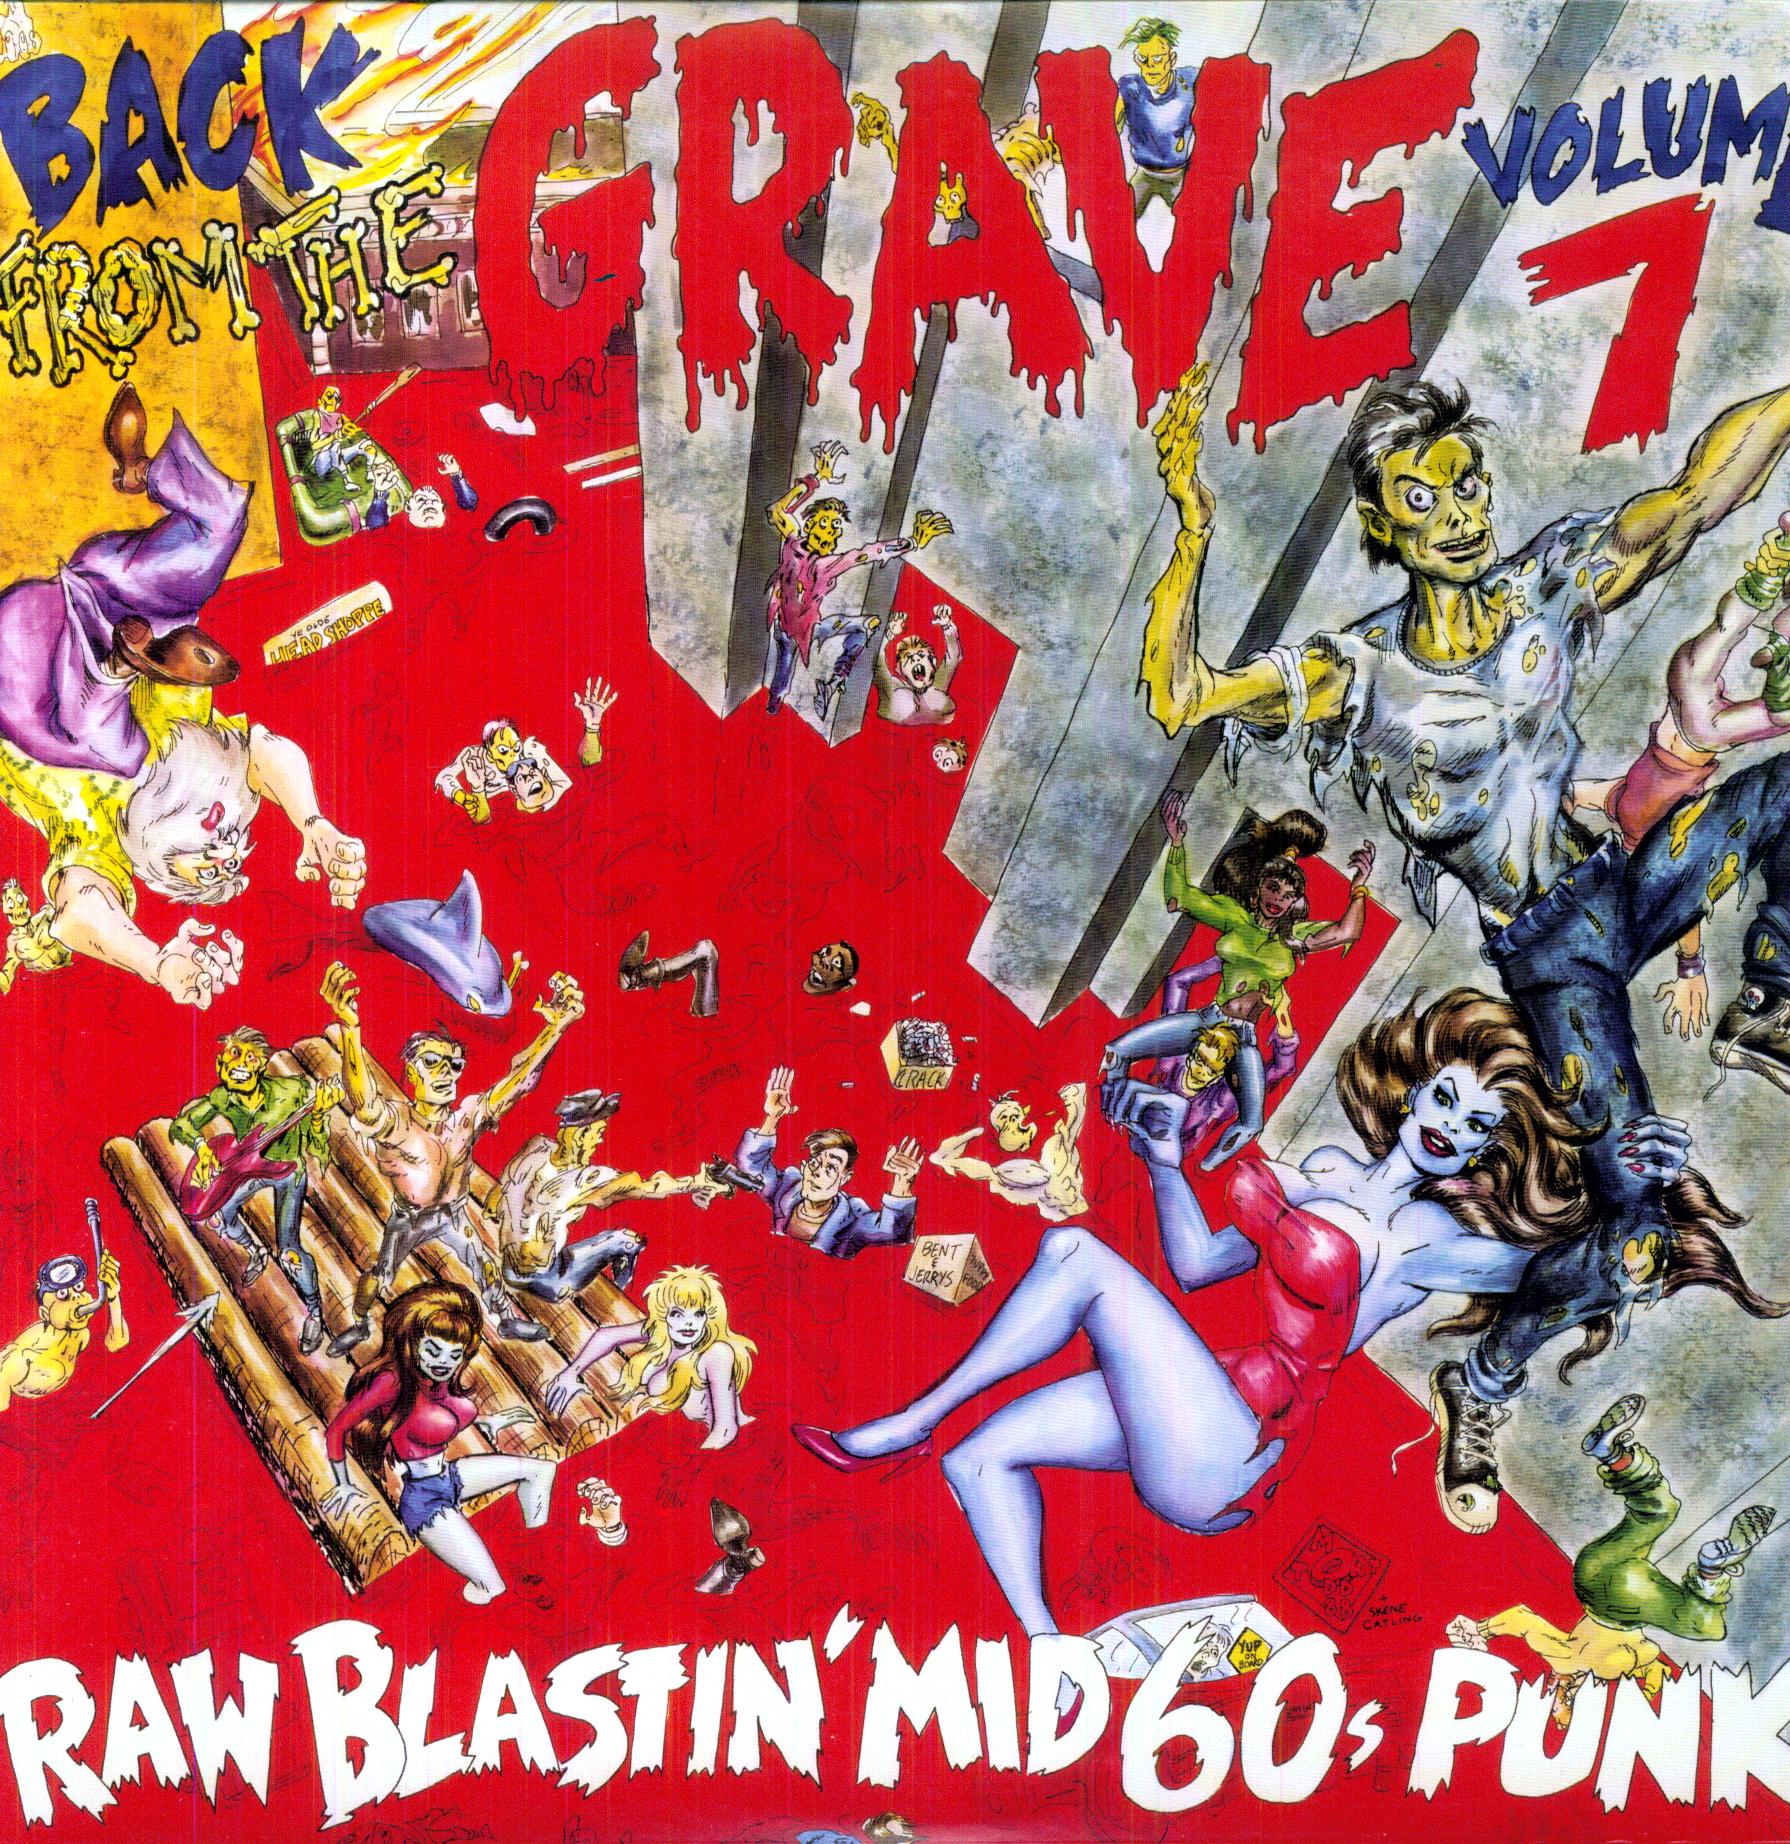 BACK FROM THE GRAVE 7 / VARIOUS